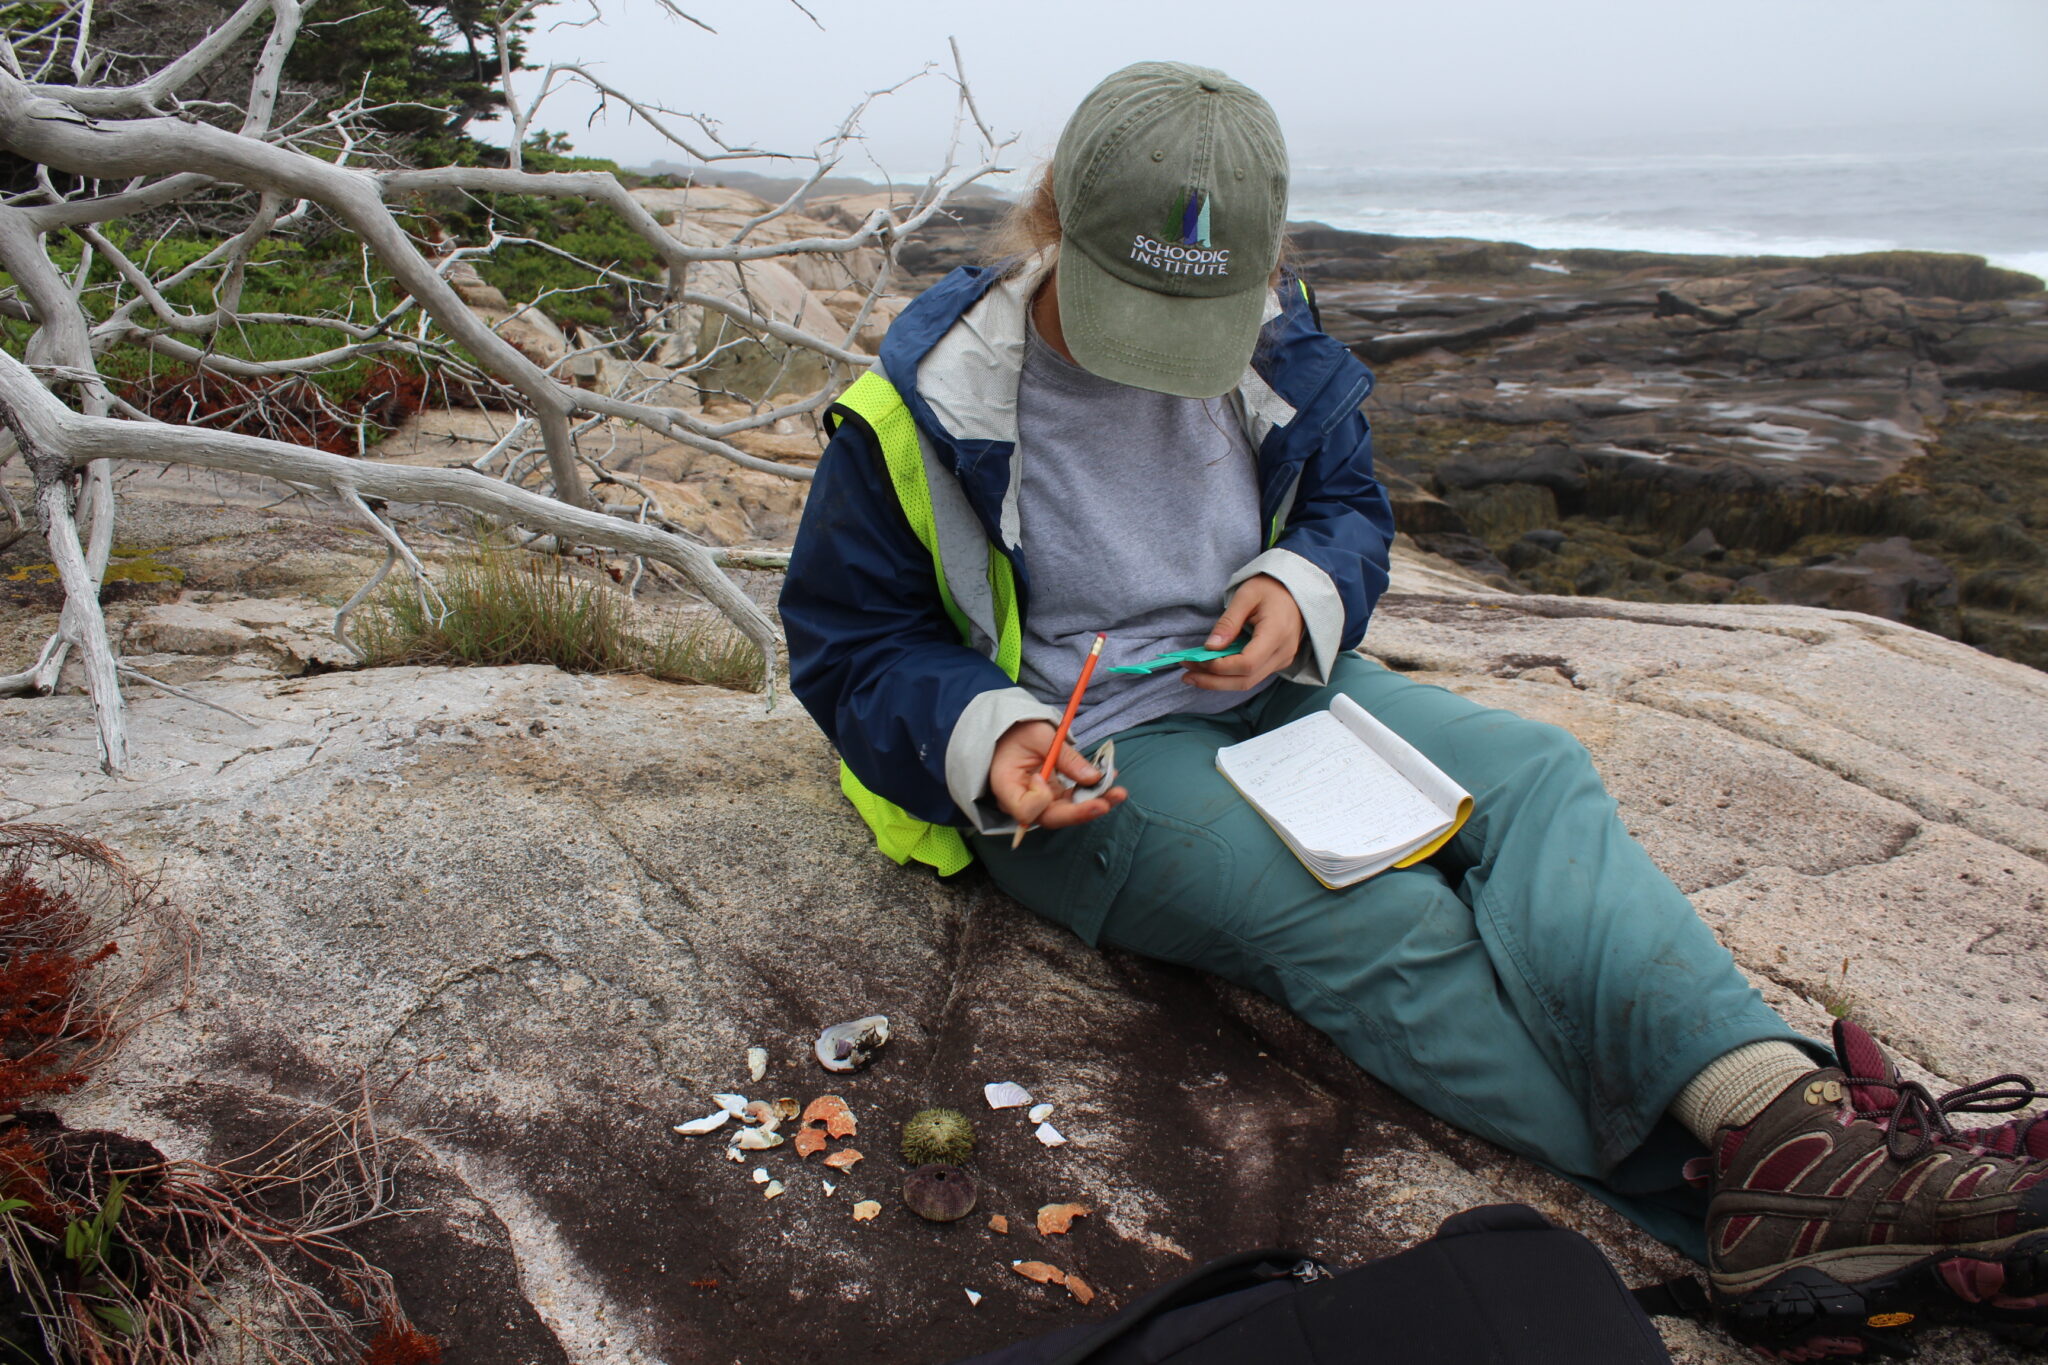 Abby O. sits on the rocks near the sea with an open notebook on her lap, her head down as she studies the small creatures of the intertidal.